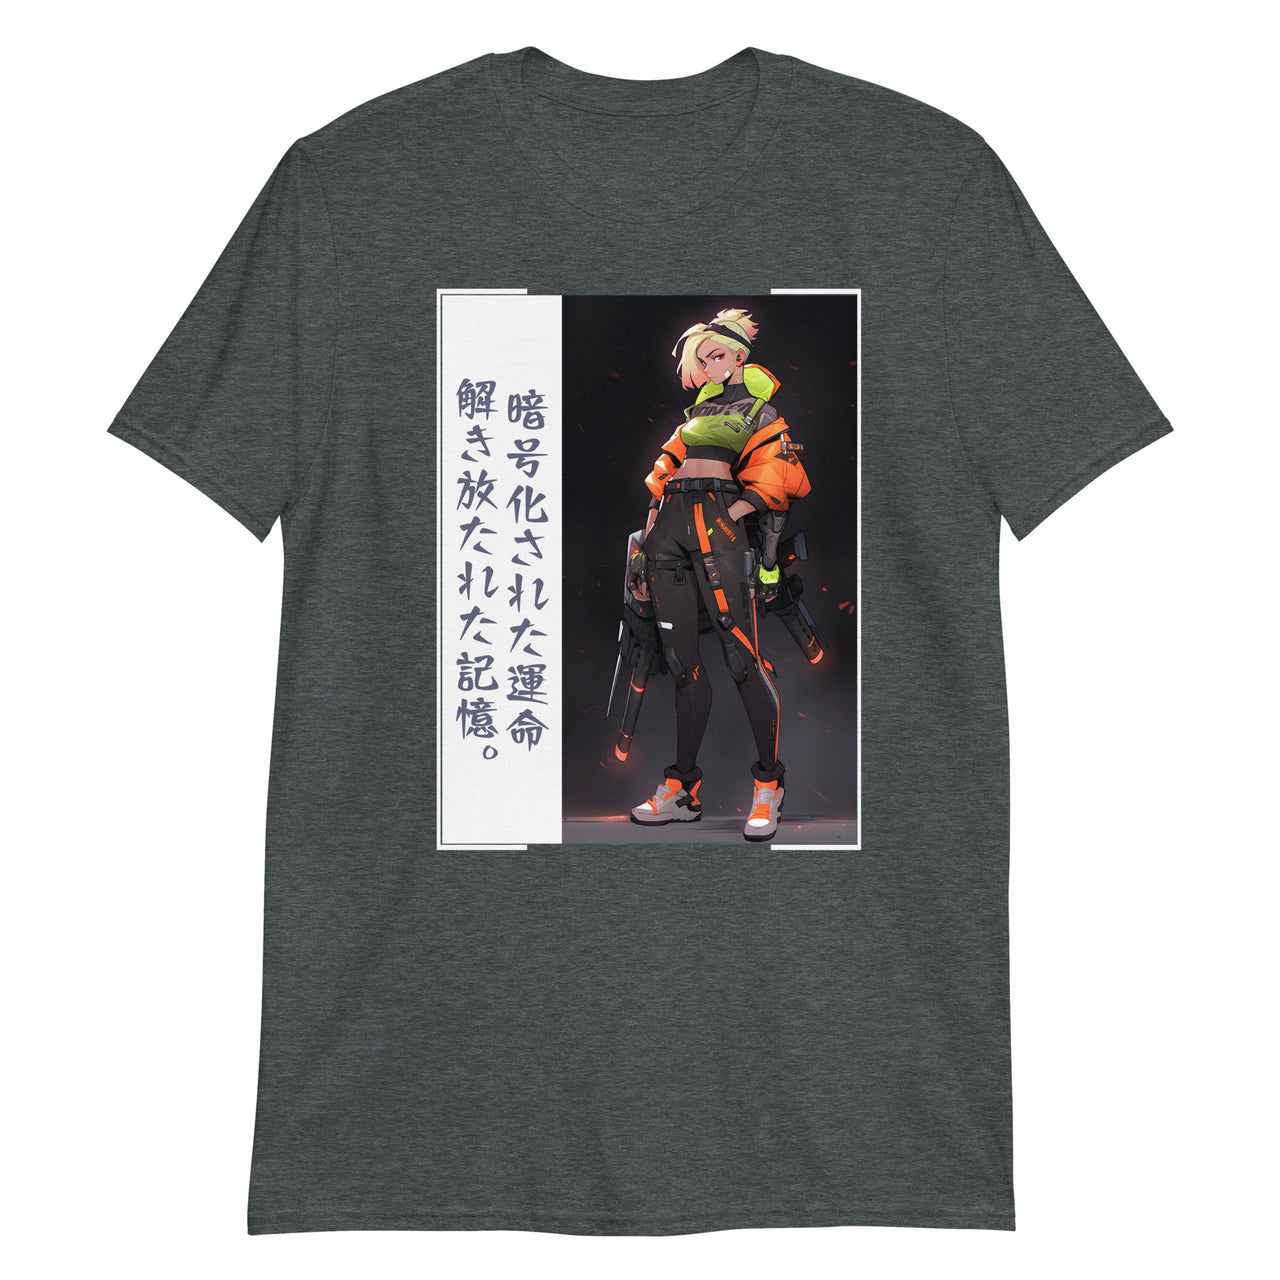 Encrypted Fate, Memories Unleashed Anime T-Shirt